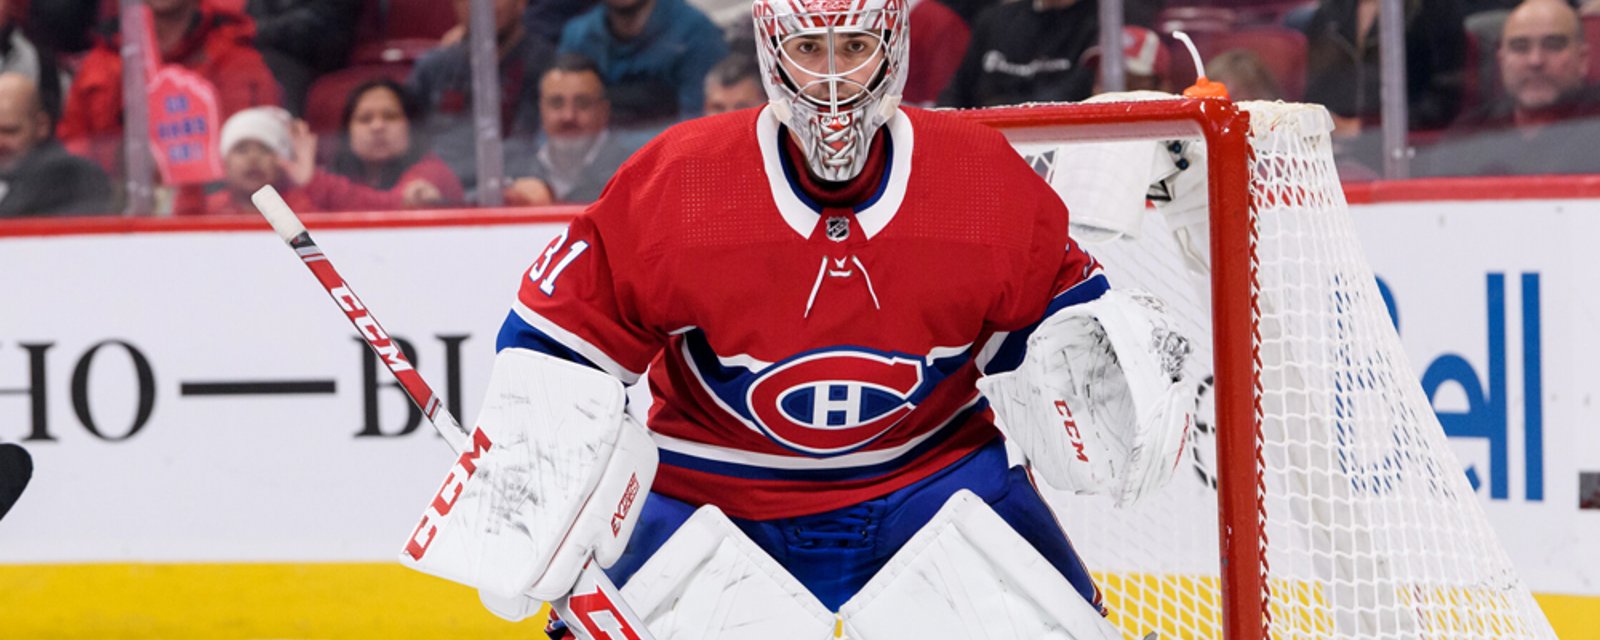 Poll of nearly 500 NHLers shows that Carey Price has taken a HUGE reputation hit